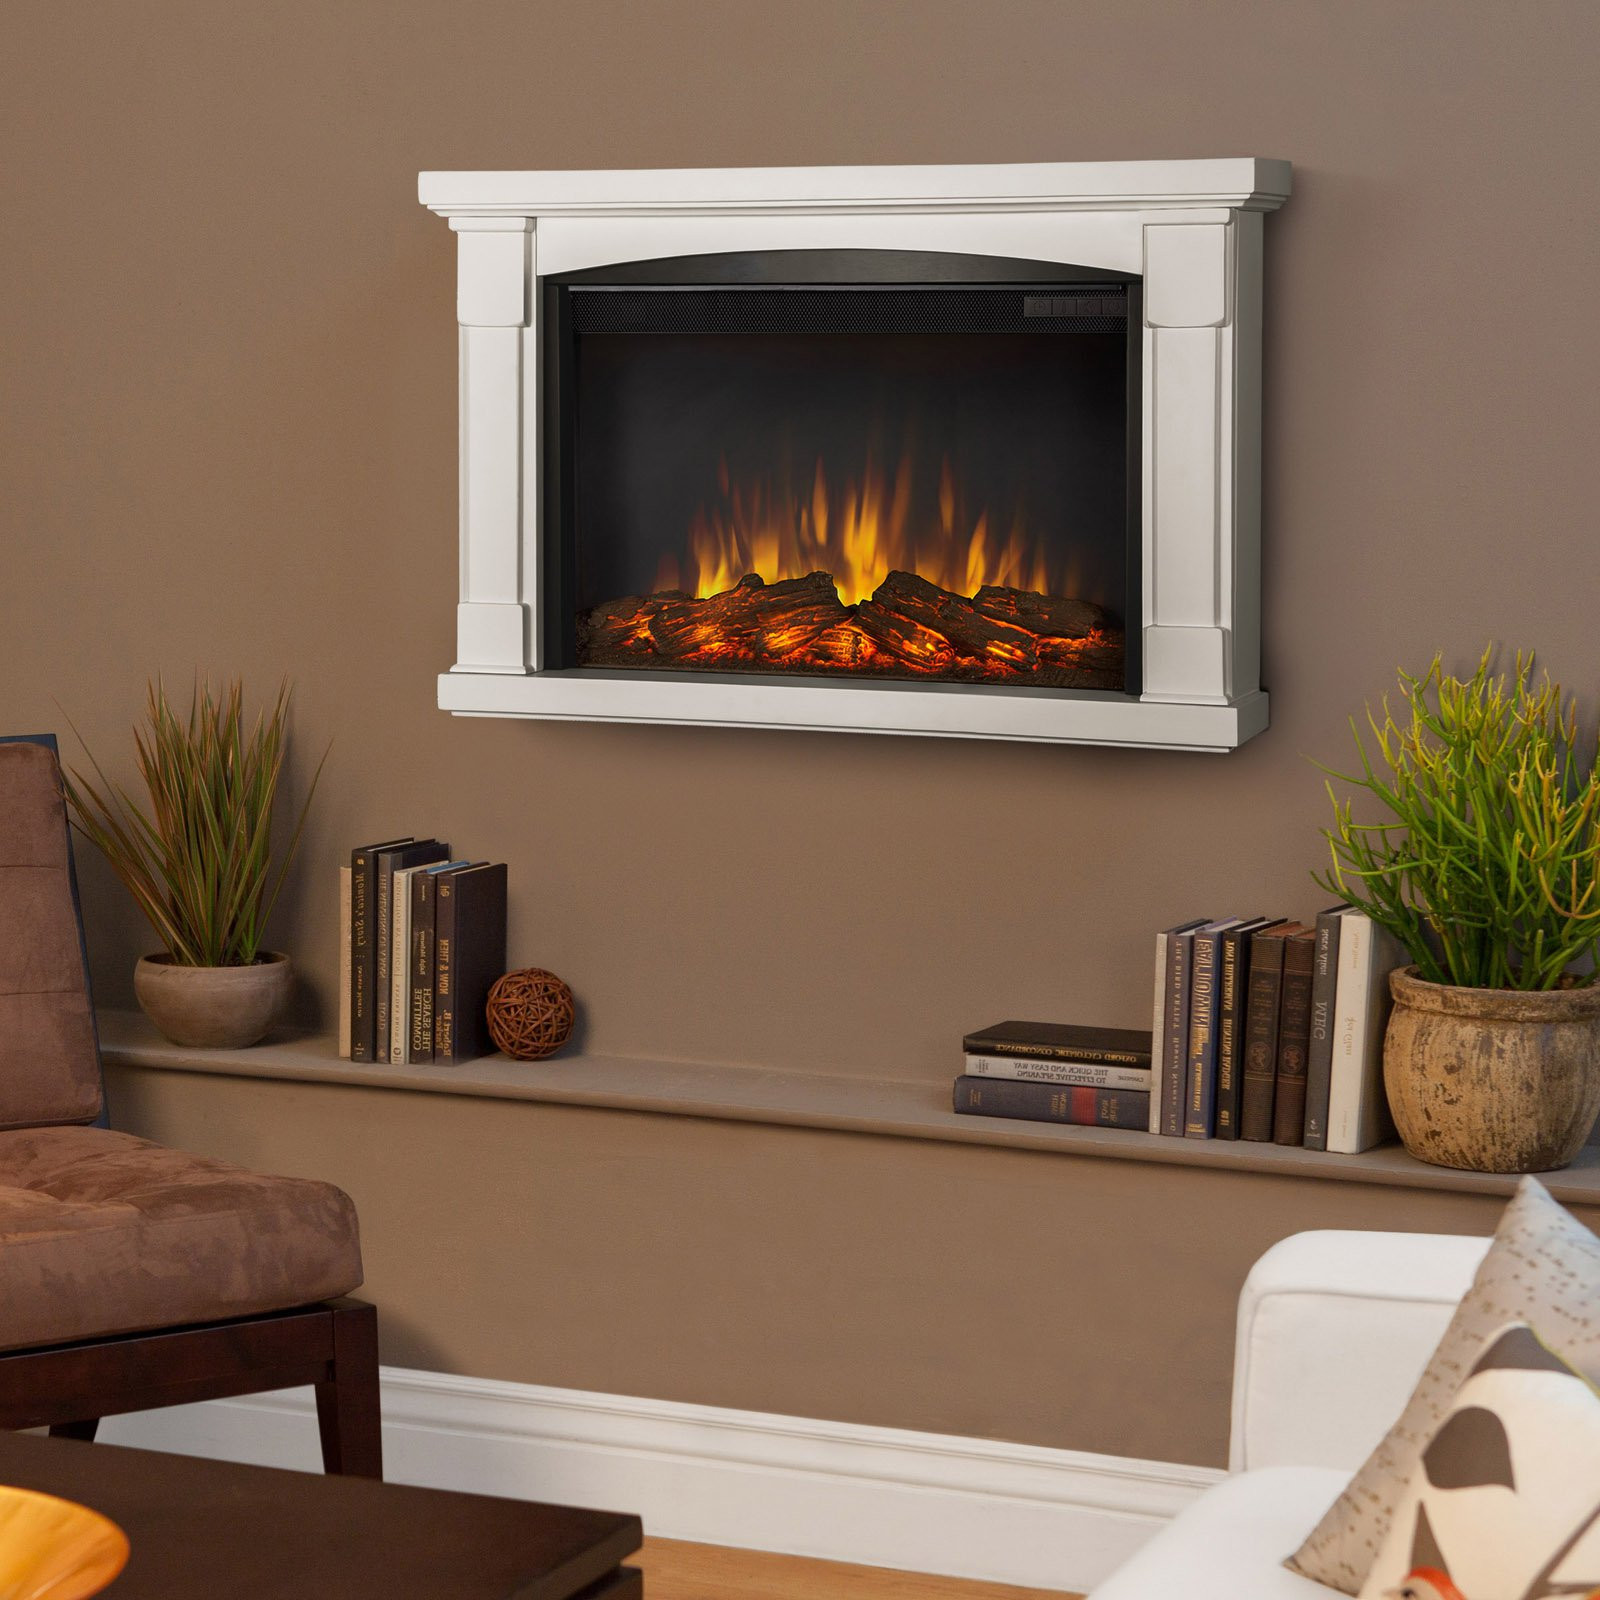 White Wall Mount Electric Fireplace
 Real Flame Brighton Slim Line Wall Hung Electric Fireplace